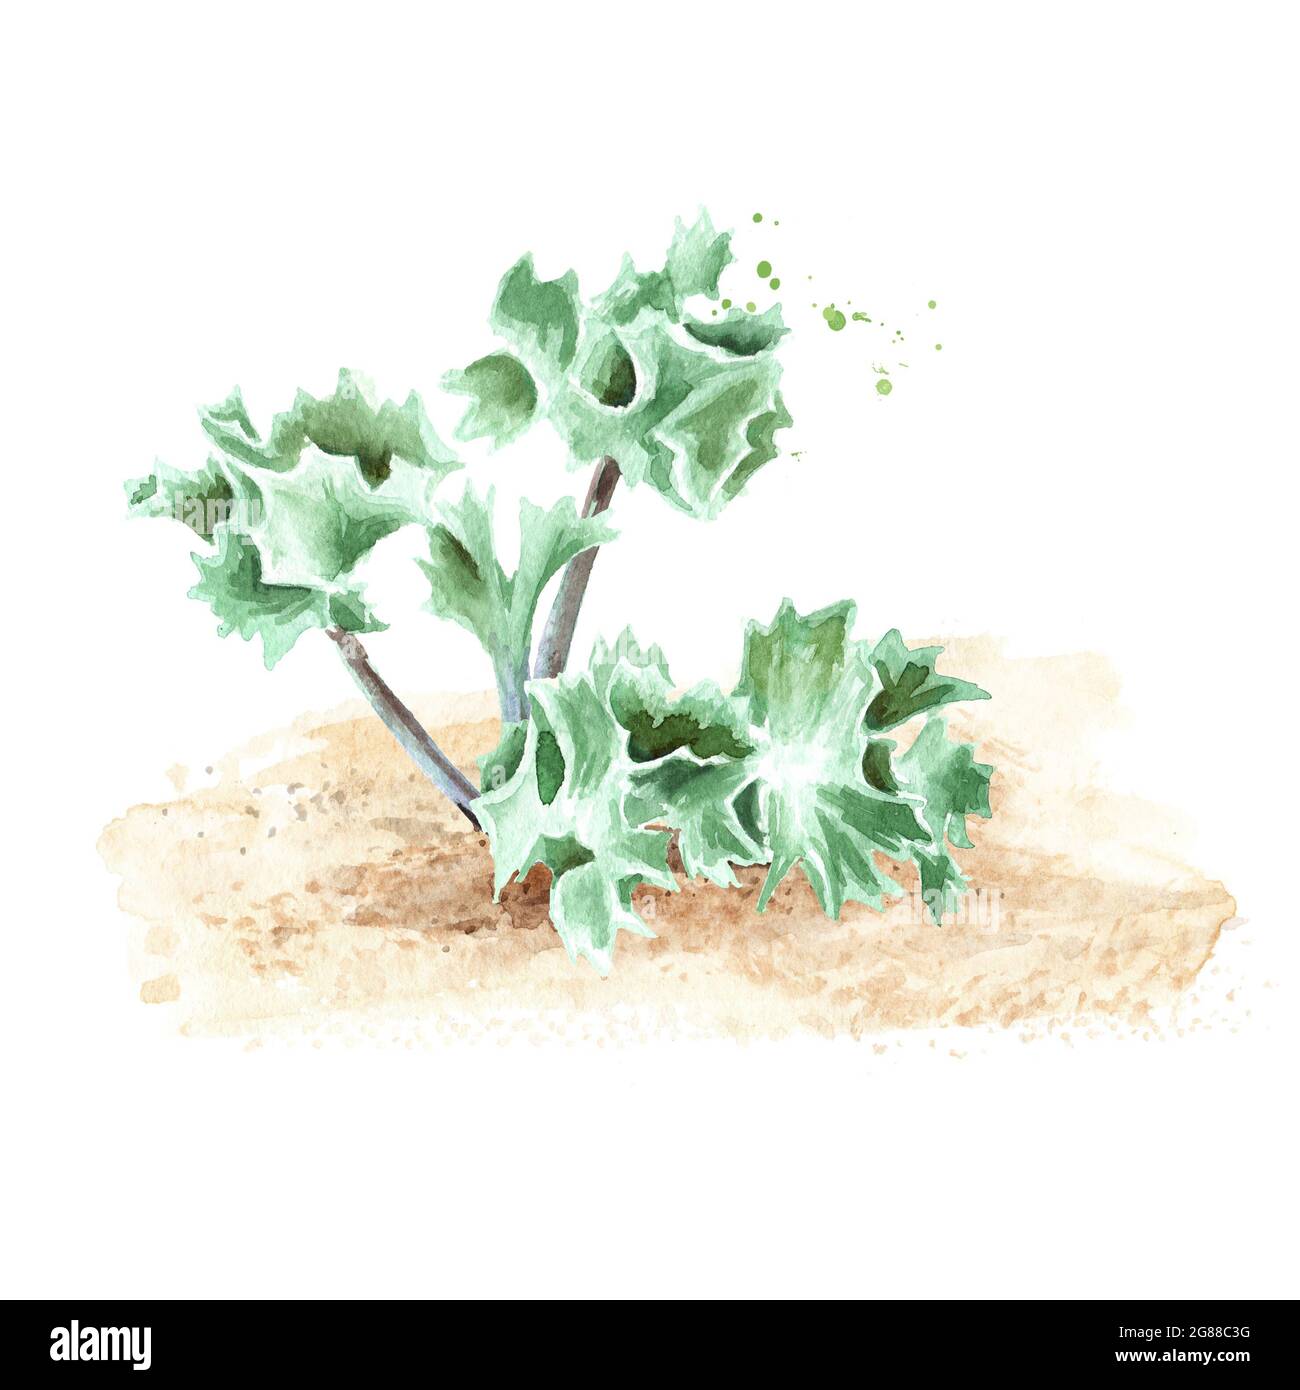 Beach plant on the sand. Hand drawn watercolor illustration, isolated on white background Stock Photo